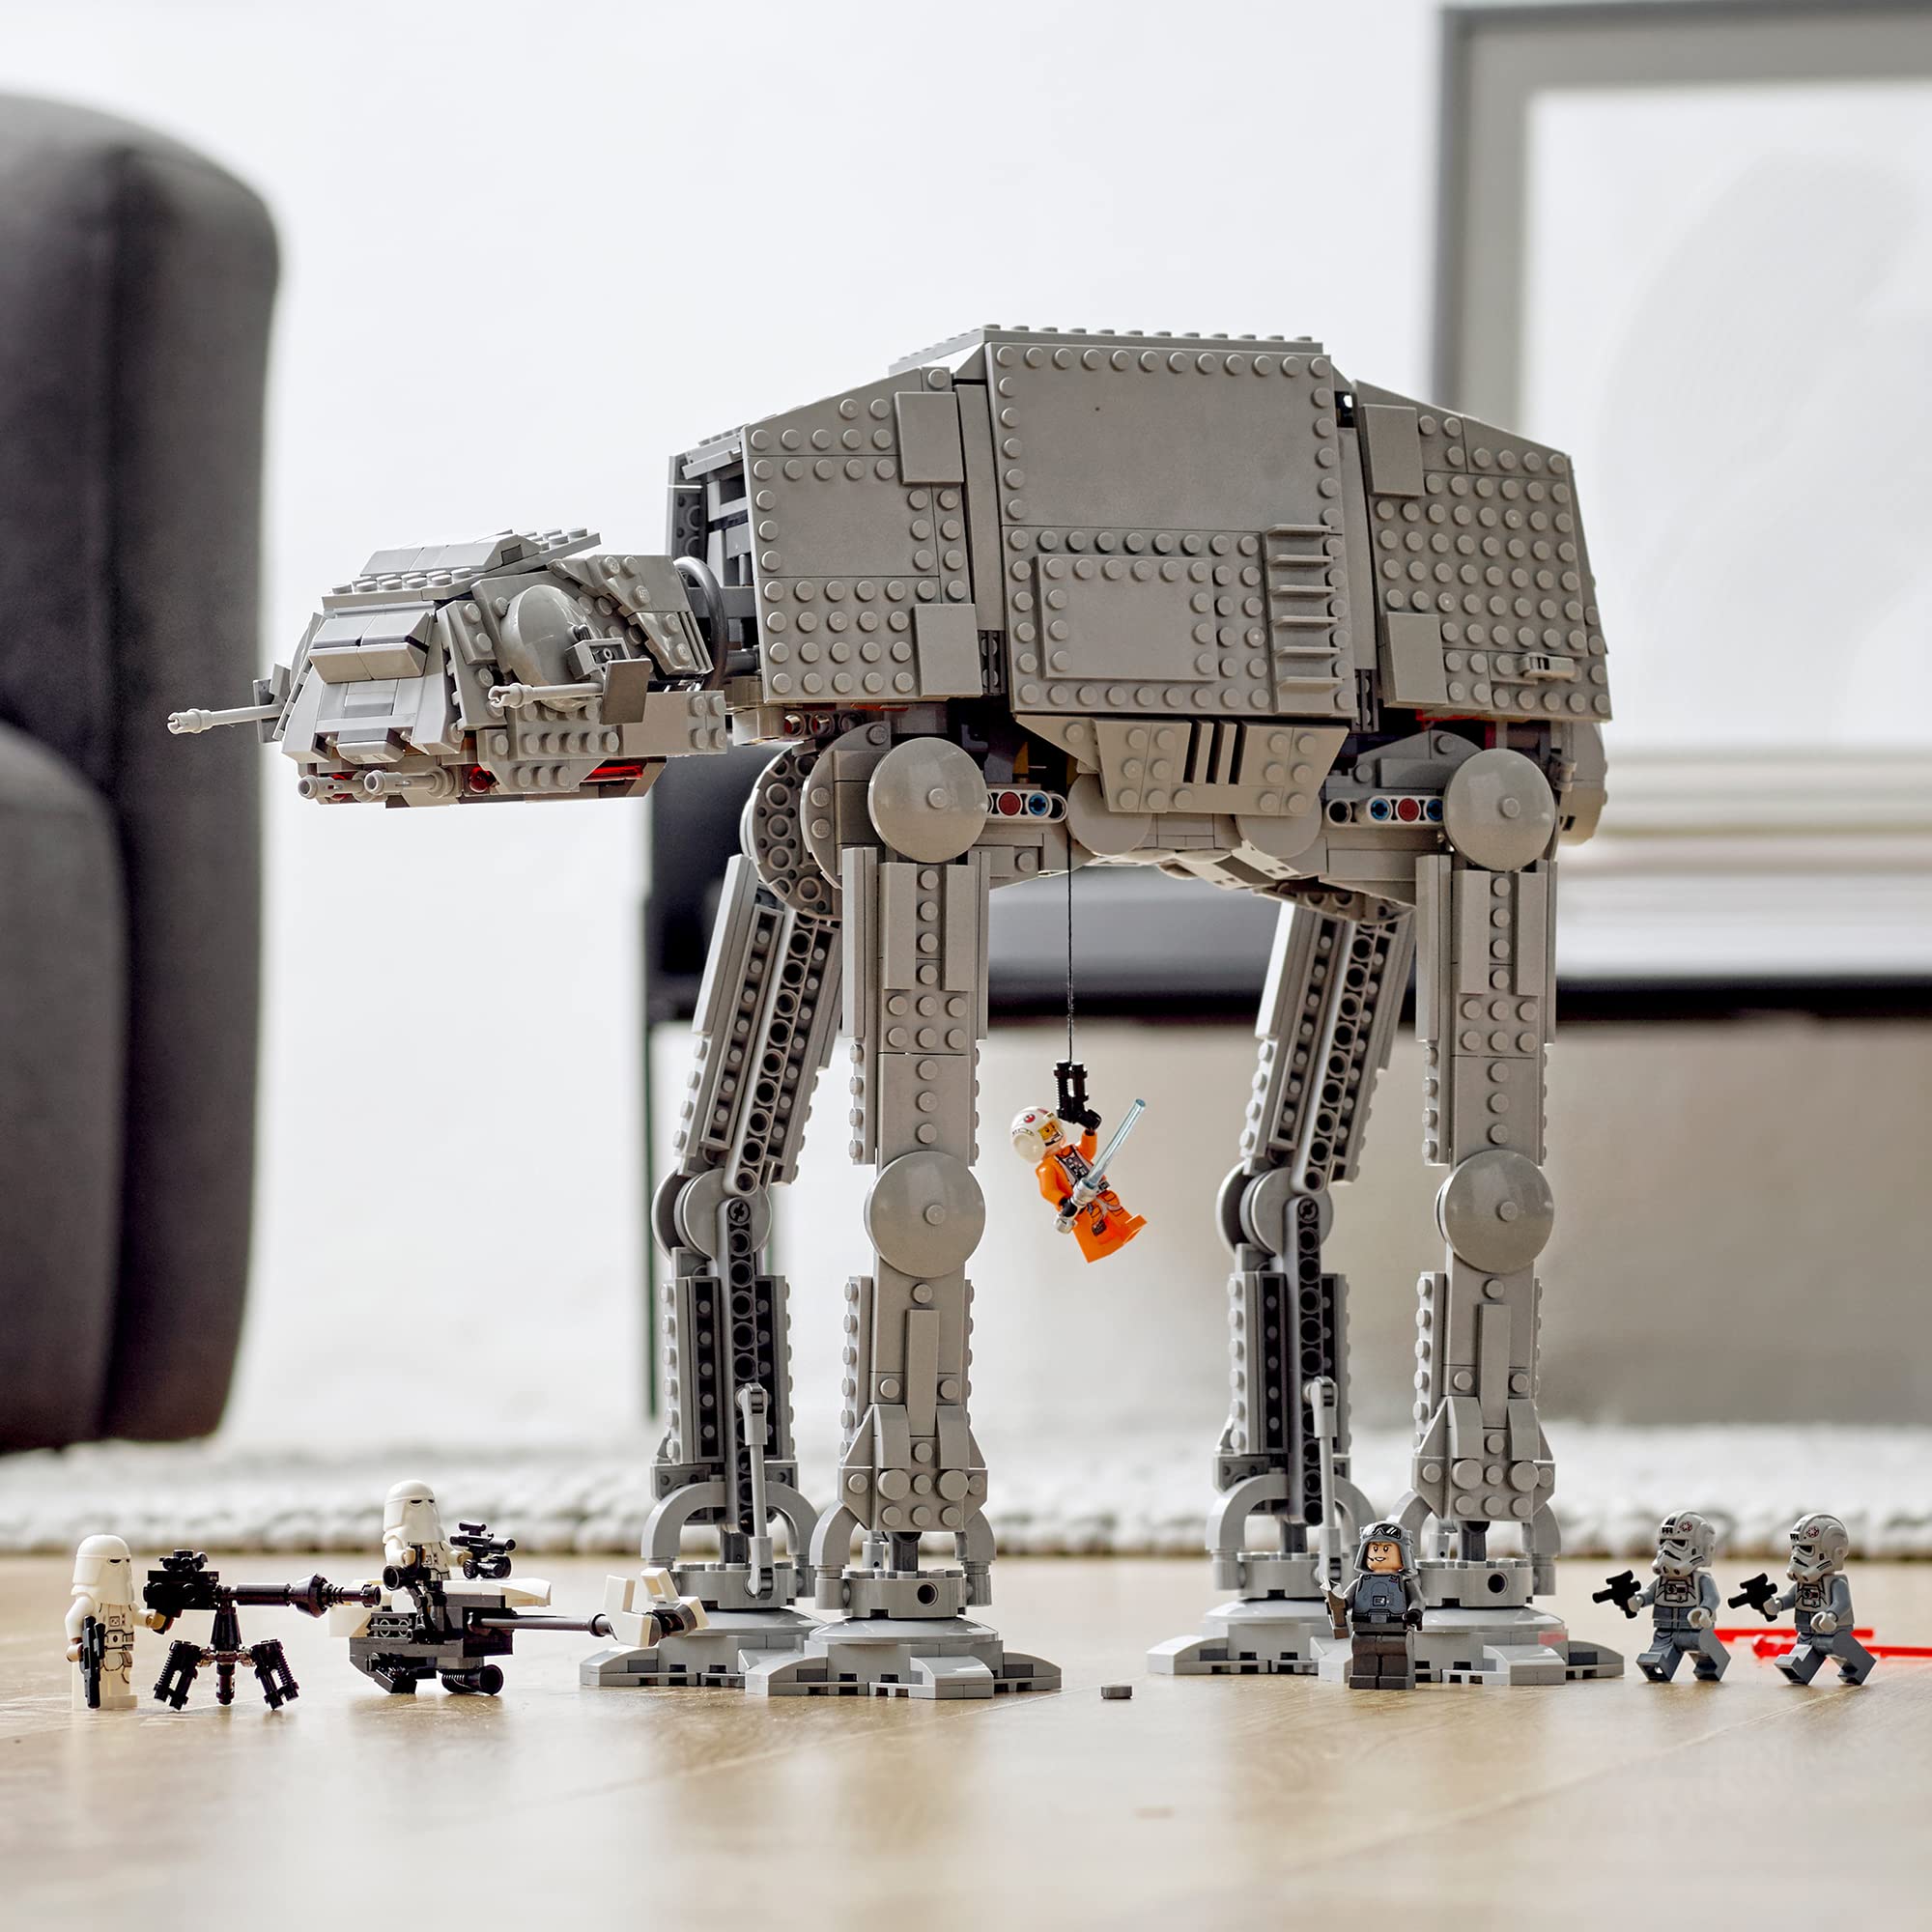 LEGO 75288 Star Wars at-at Walker Toy 40th Anniversary Set, 10 years and up.